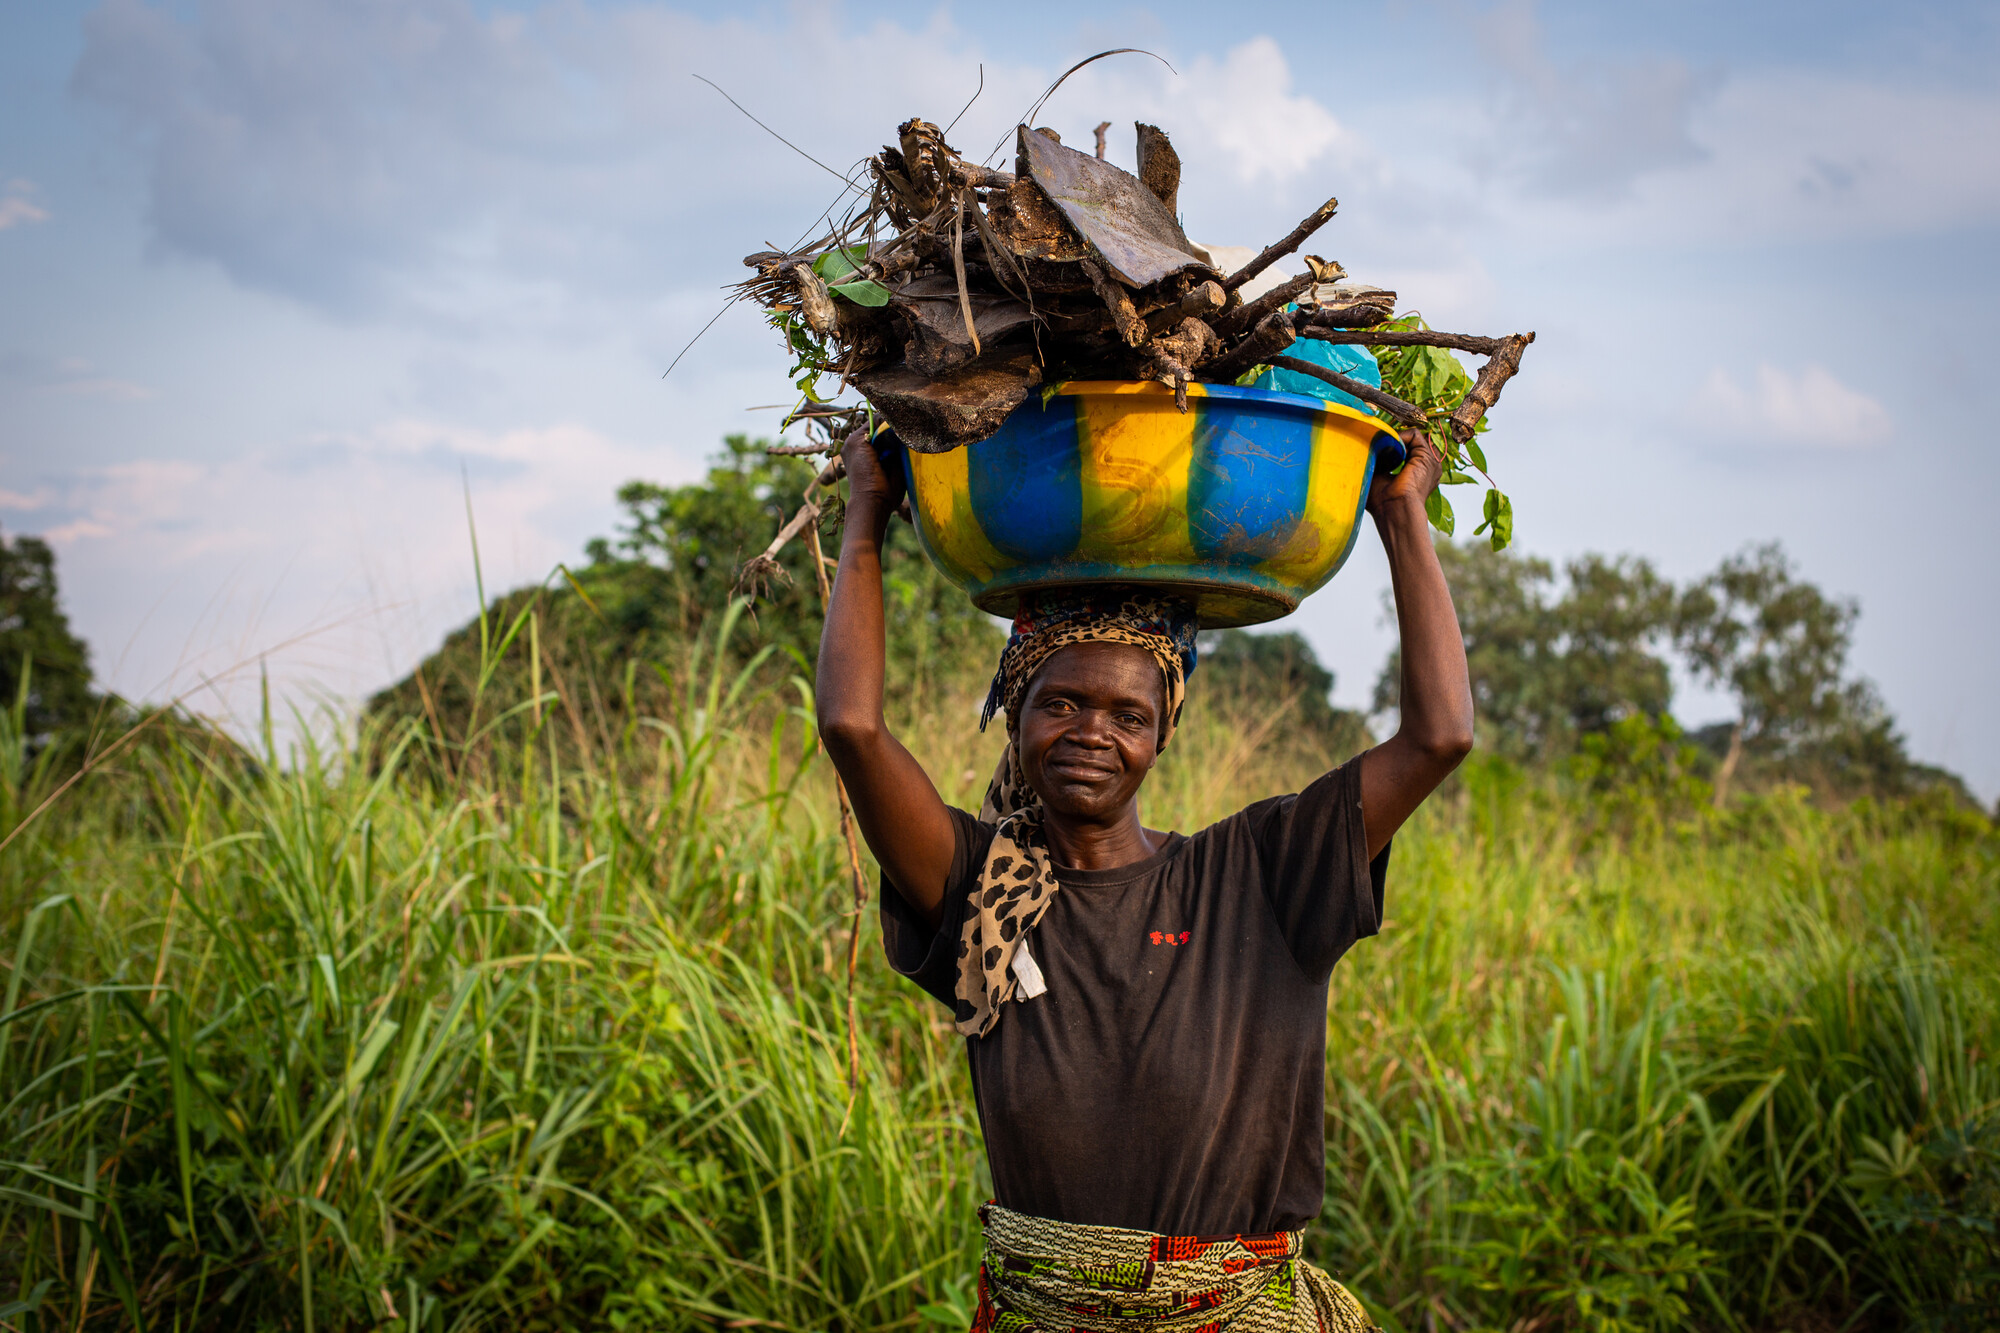 A woman holds a large yellow and blue bucket on her head. The bucket is full of firewood.